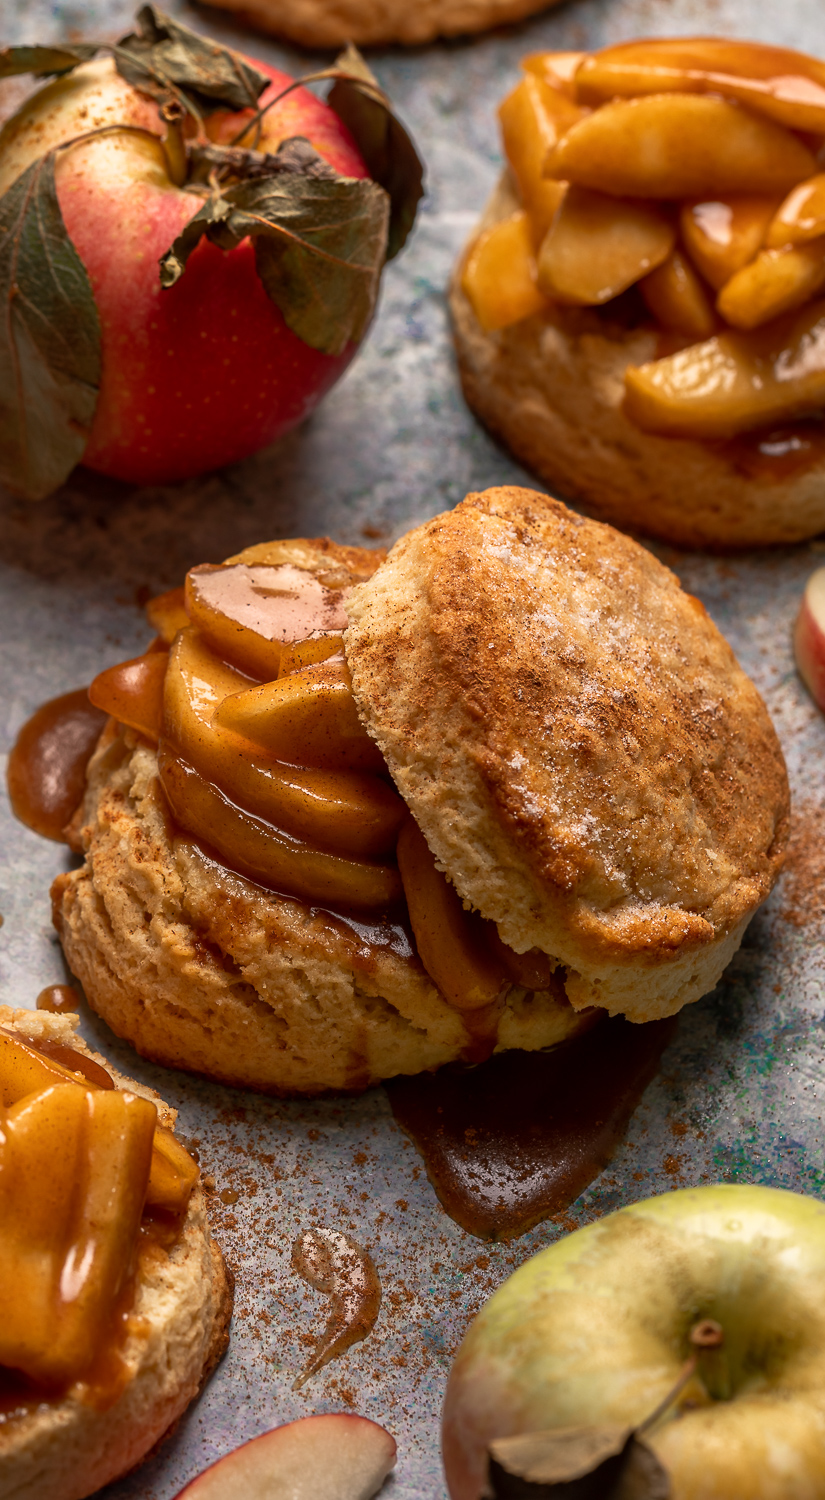 Featuring buttery biscuits topped with sugar and cinnamon and gooey apple pie filling, these cinnamon apple shortcakes are a Fall favorite! A great way to use up an abundance of apples. Top with freshly whipped cream or ice cream!